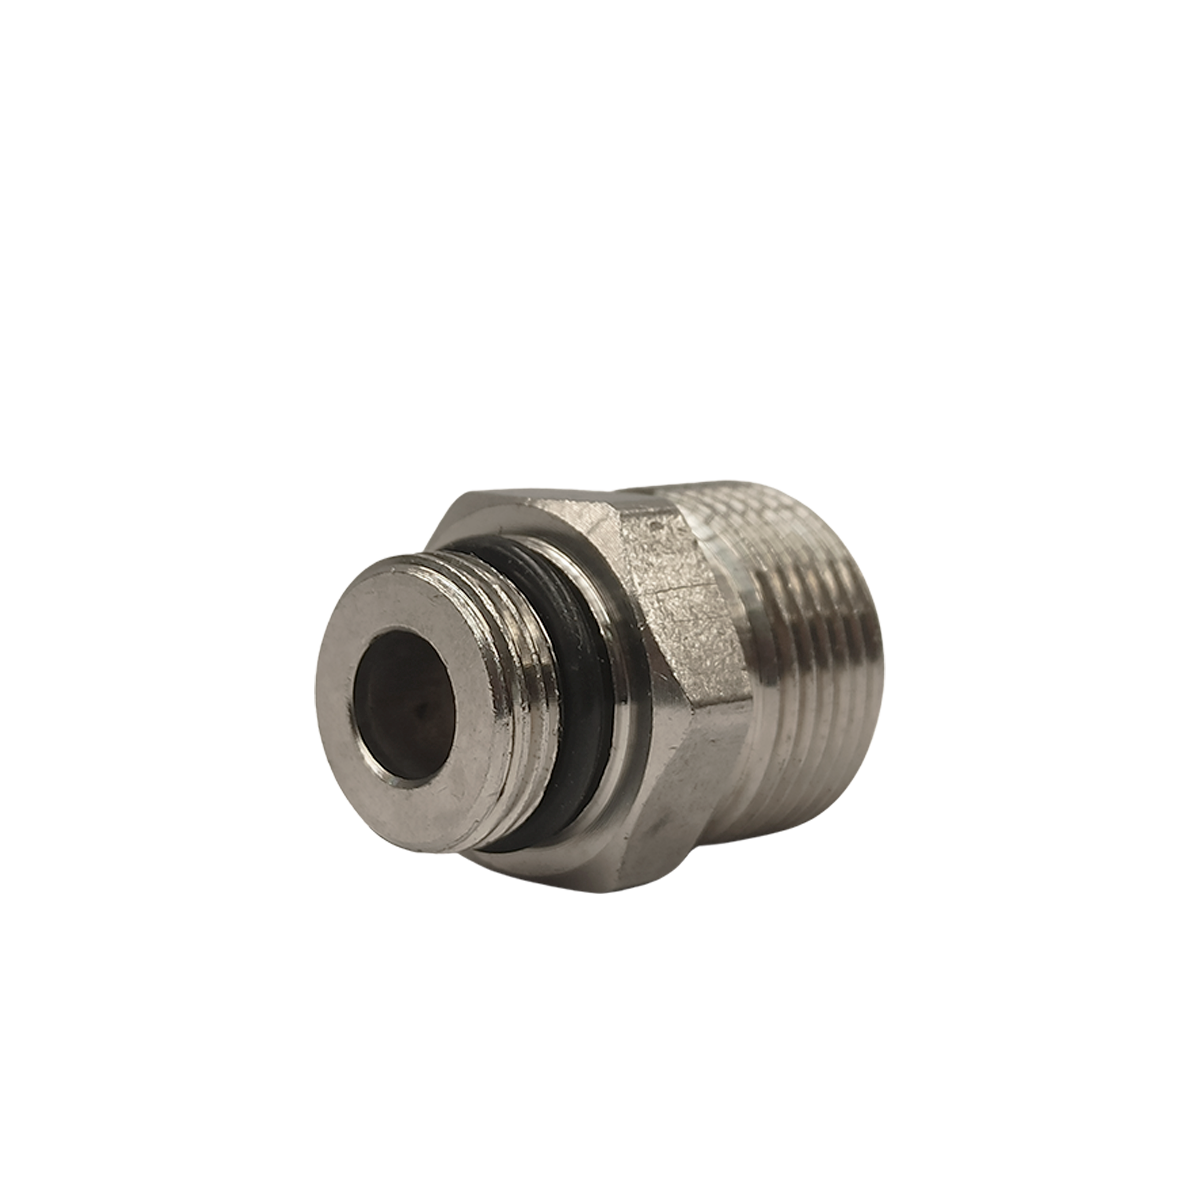 Conector He M22 X M15 X 3/8 - 0